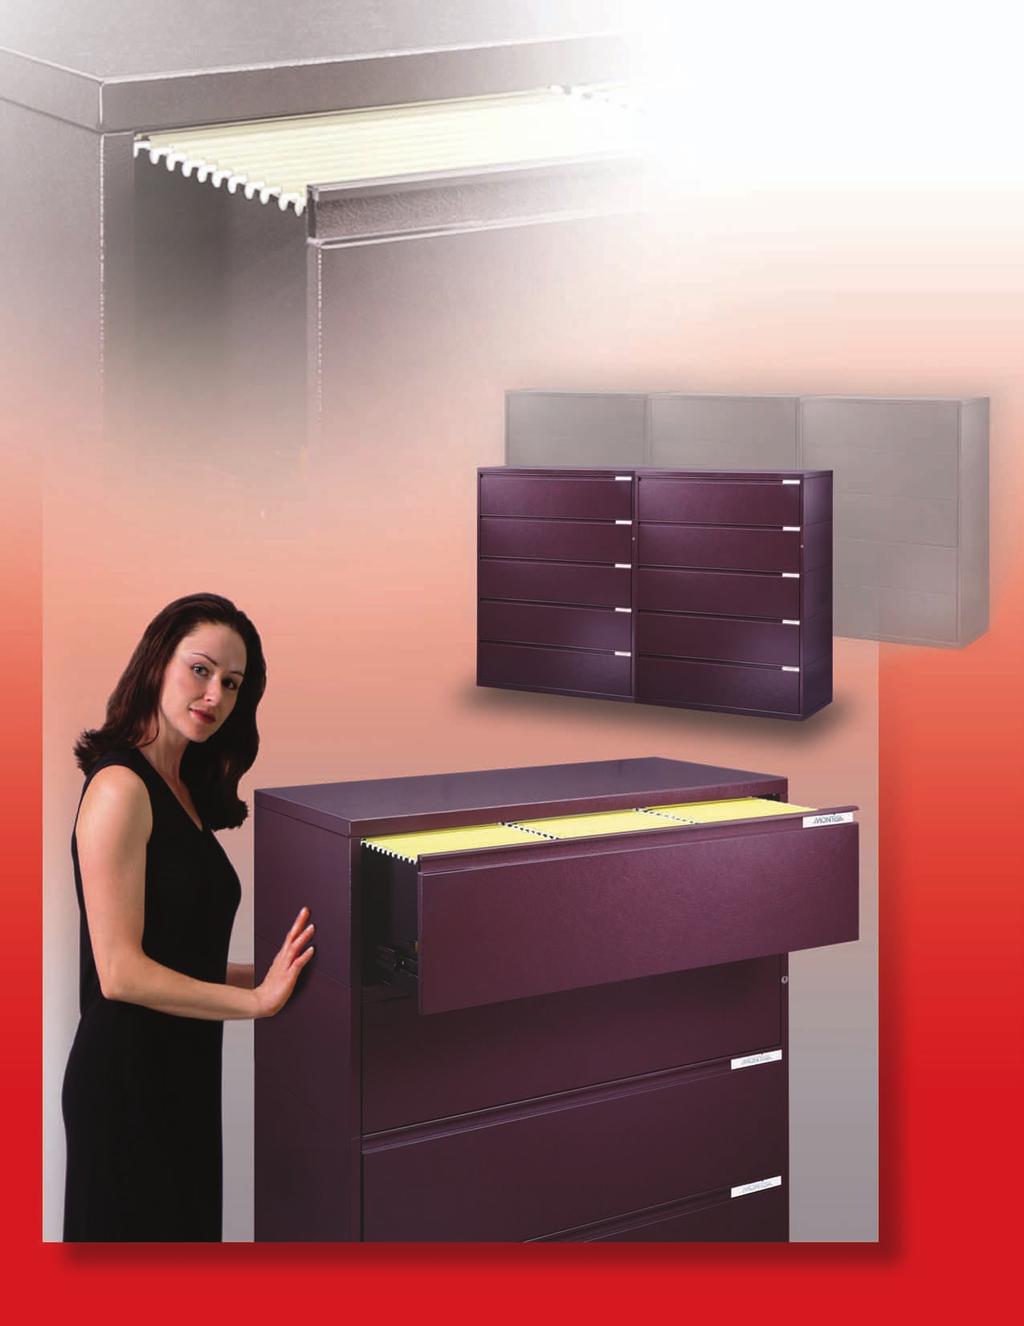 Fully accessible filing in all 5 drawers at a height of only 56 1 2" Provides 50% more filing capacity than conventional files Stackable quick & easy changes 10 5/8" low profile drawers Eliminate